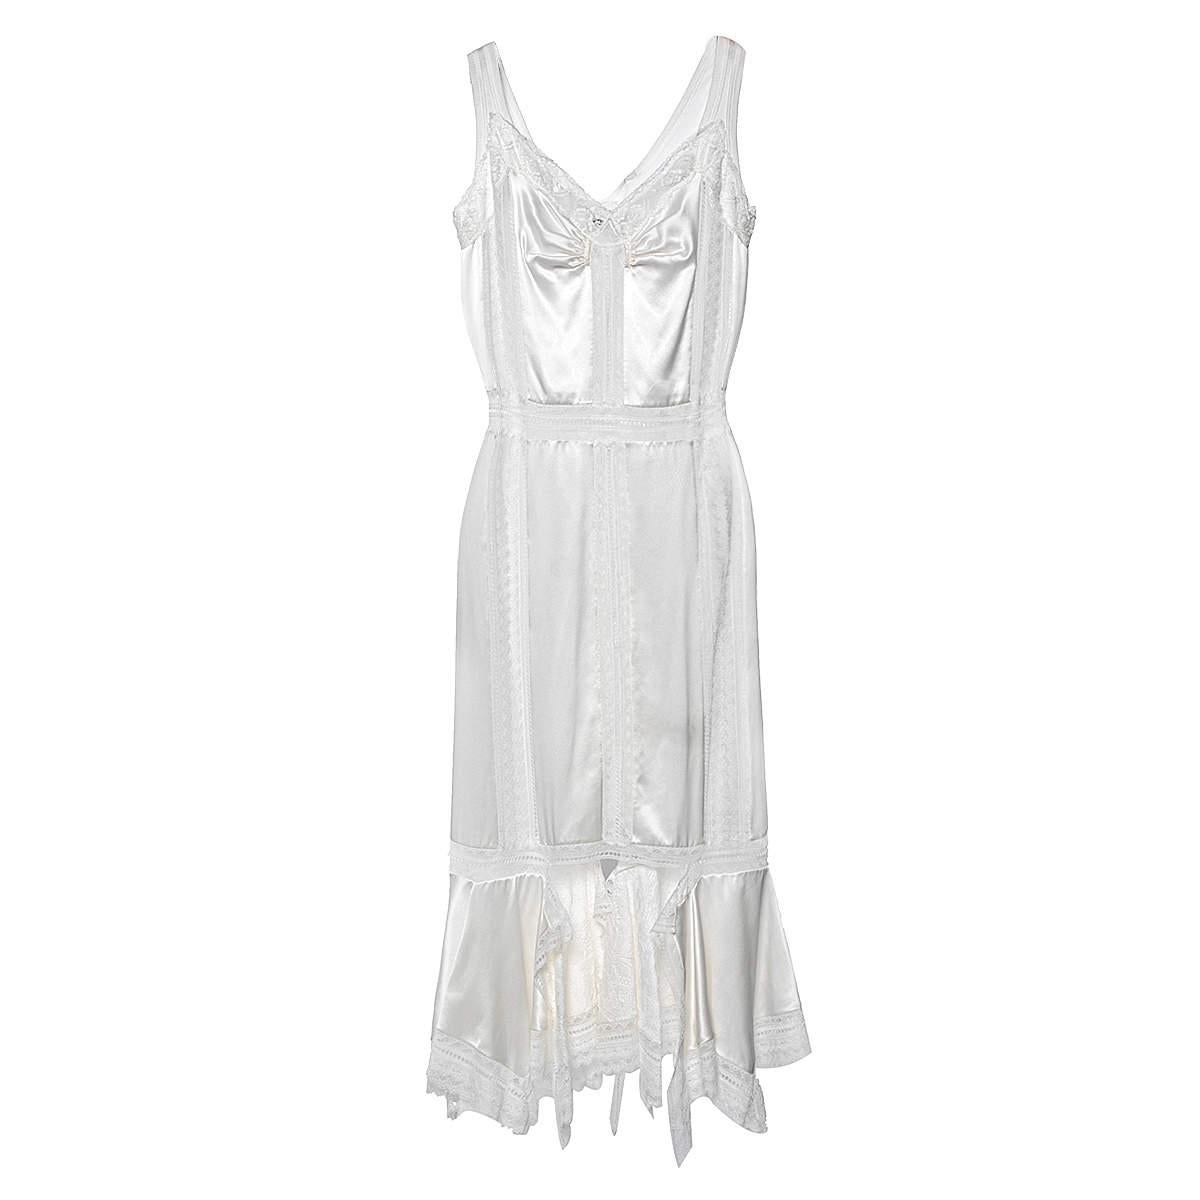 Aesthetically pleasant and pretty, this slip dress from Burberry will become your favorite creation in no time! It is designed using white satin and is enriched with lovely lace panels. It has a feminine, ethereal design and a sleeveless style. It